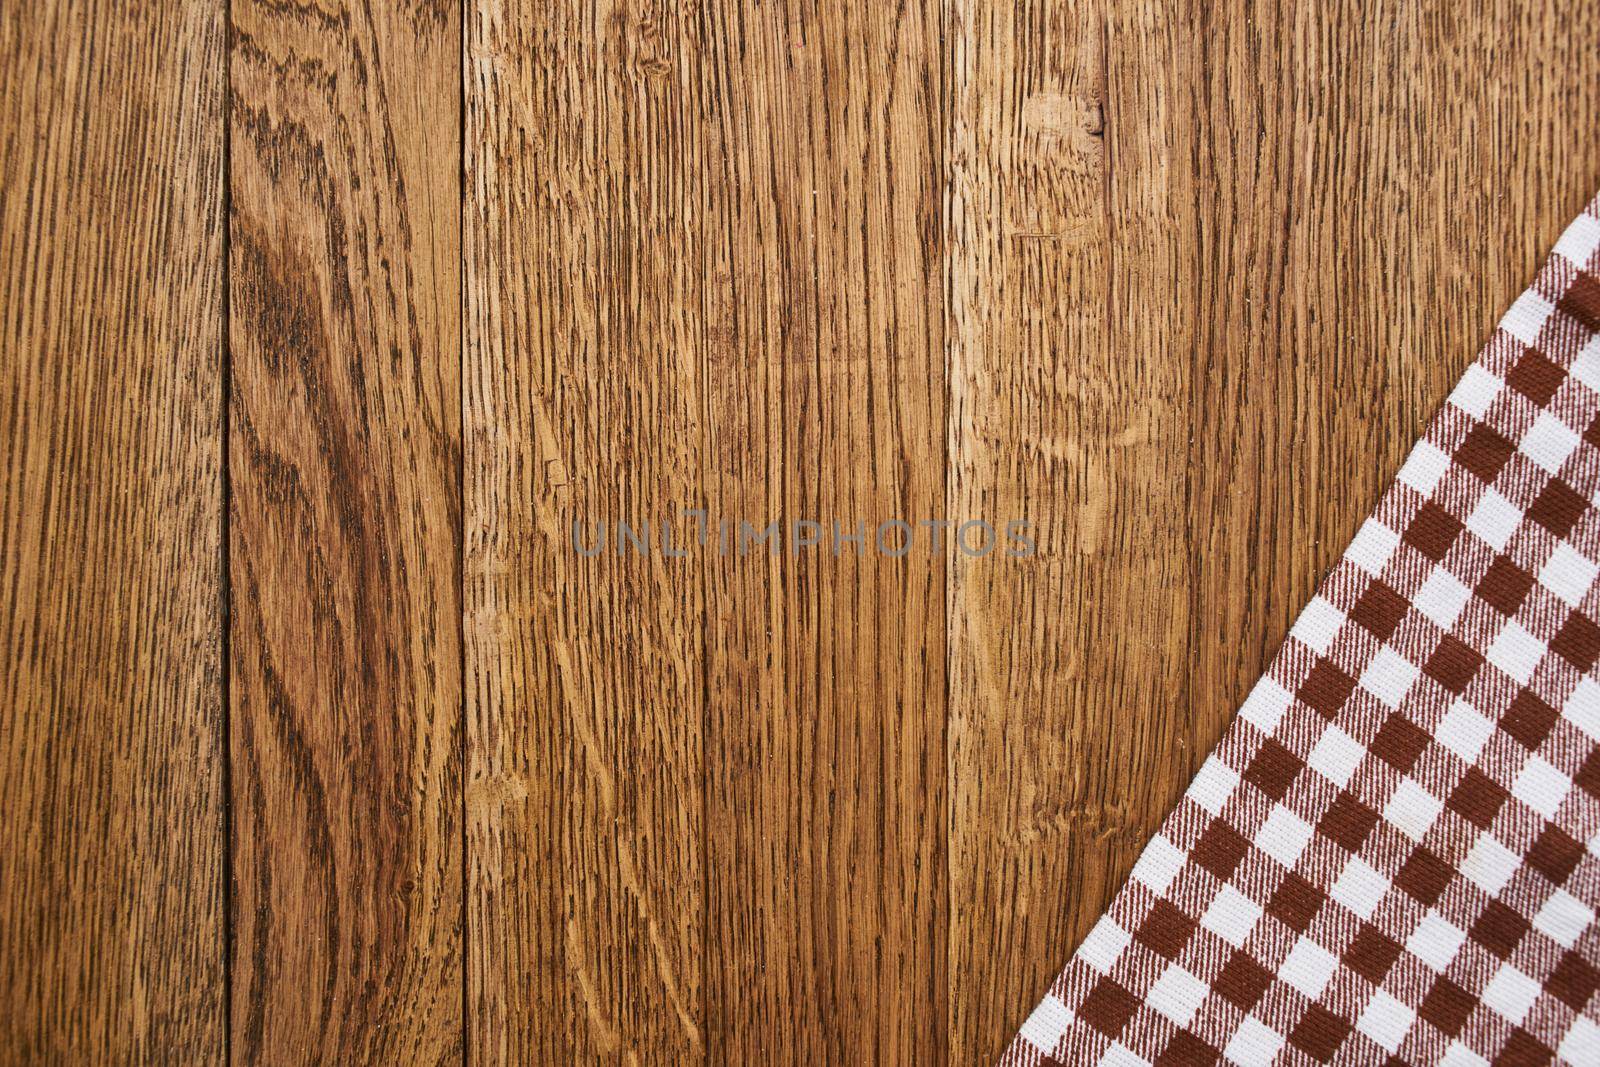 wooden table plaid tablecloth decoration kitchen top view by Vichizh